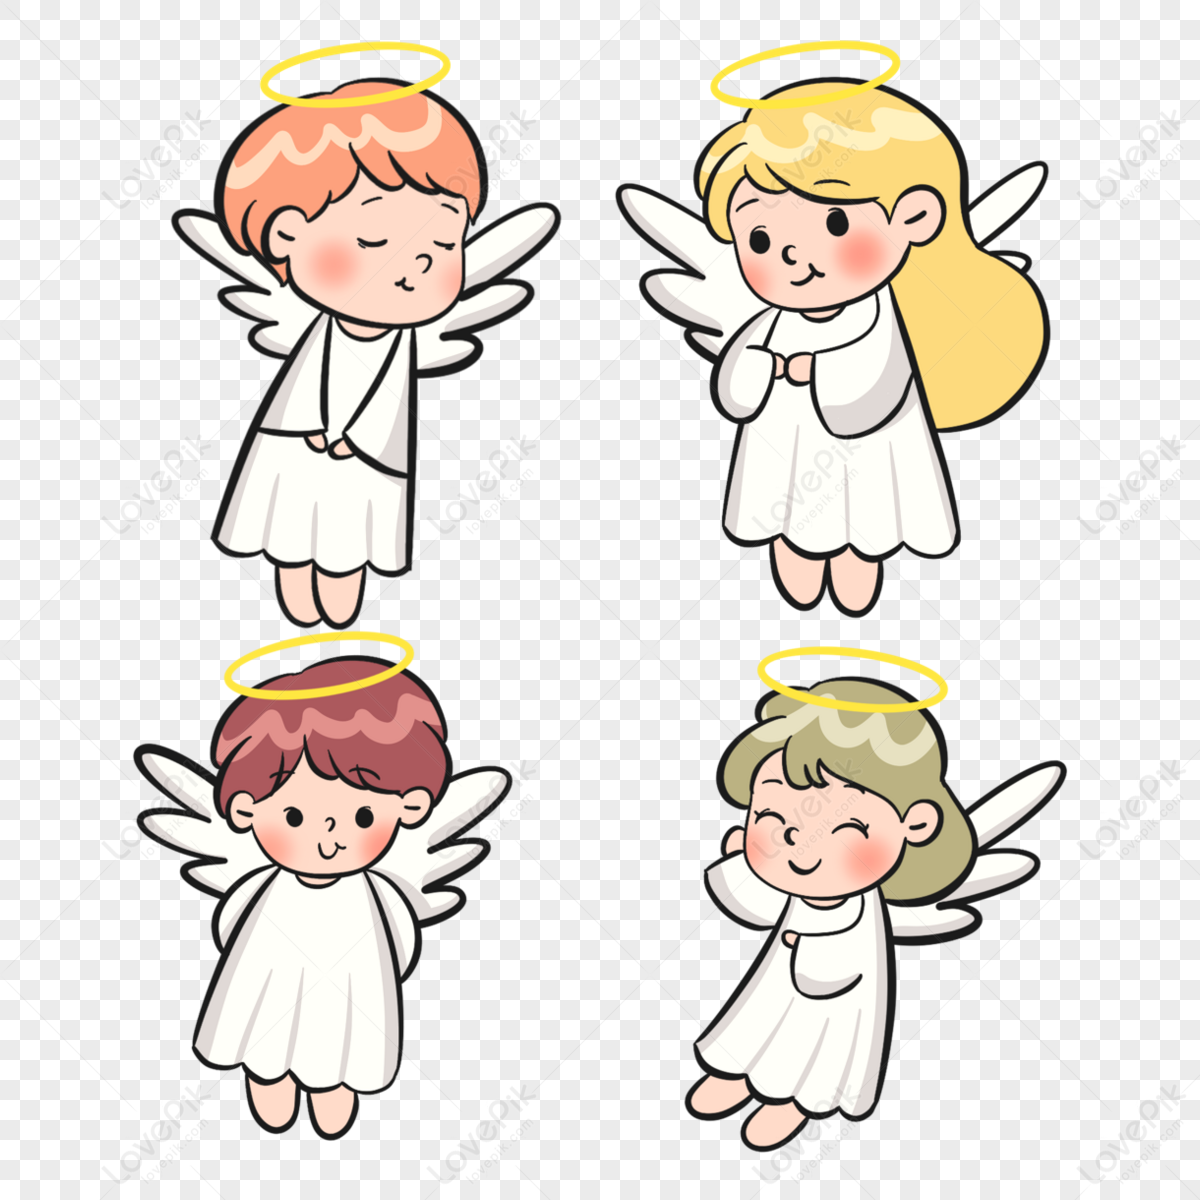 Cartoon Christmas Little Angel, Cartoon PNG Transparent Background,  Christmas PNG Transparent Images, Color Transparent PNG Free PNG Hd  Transparent Image And Clipart Image For Free Download - Lovepik | 375667234